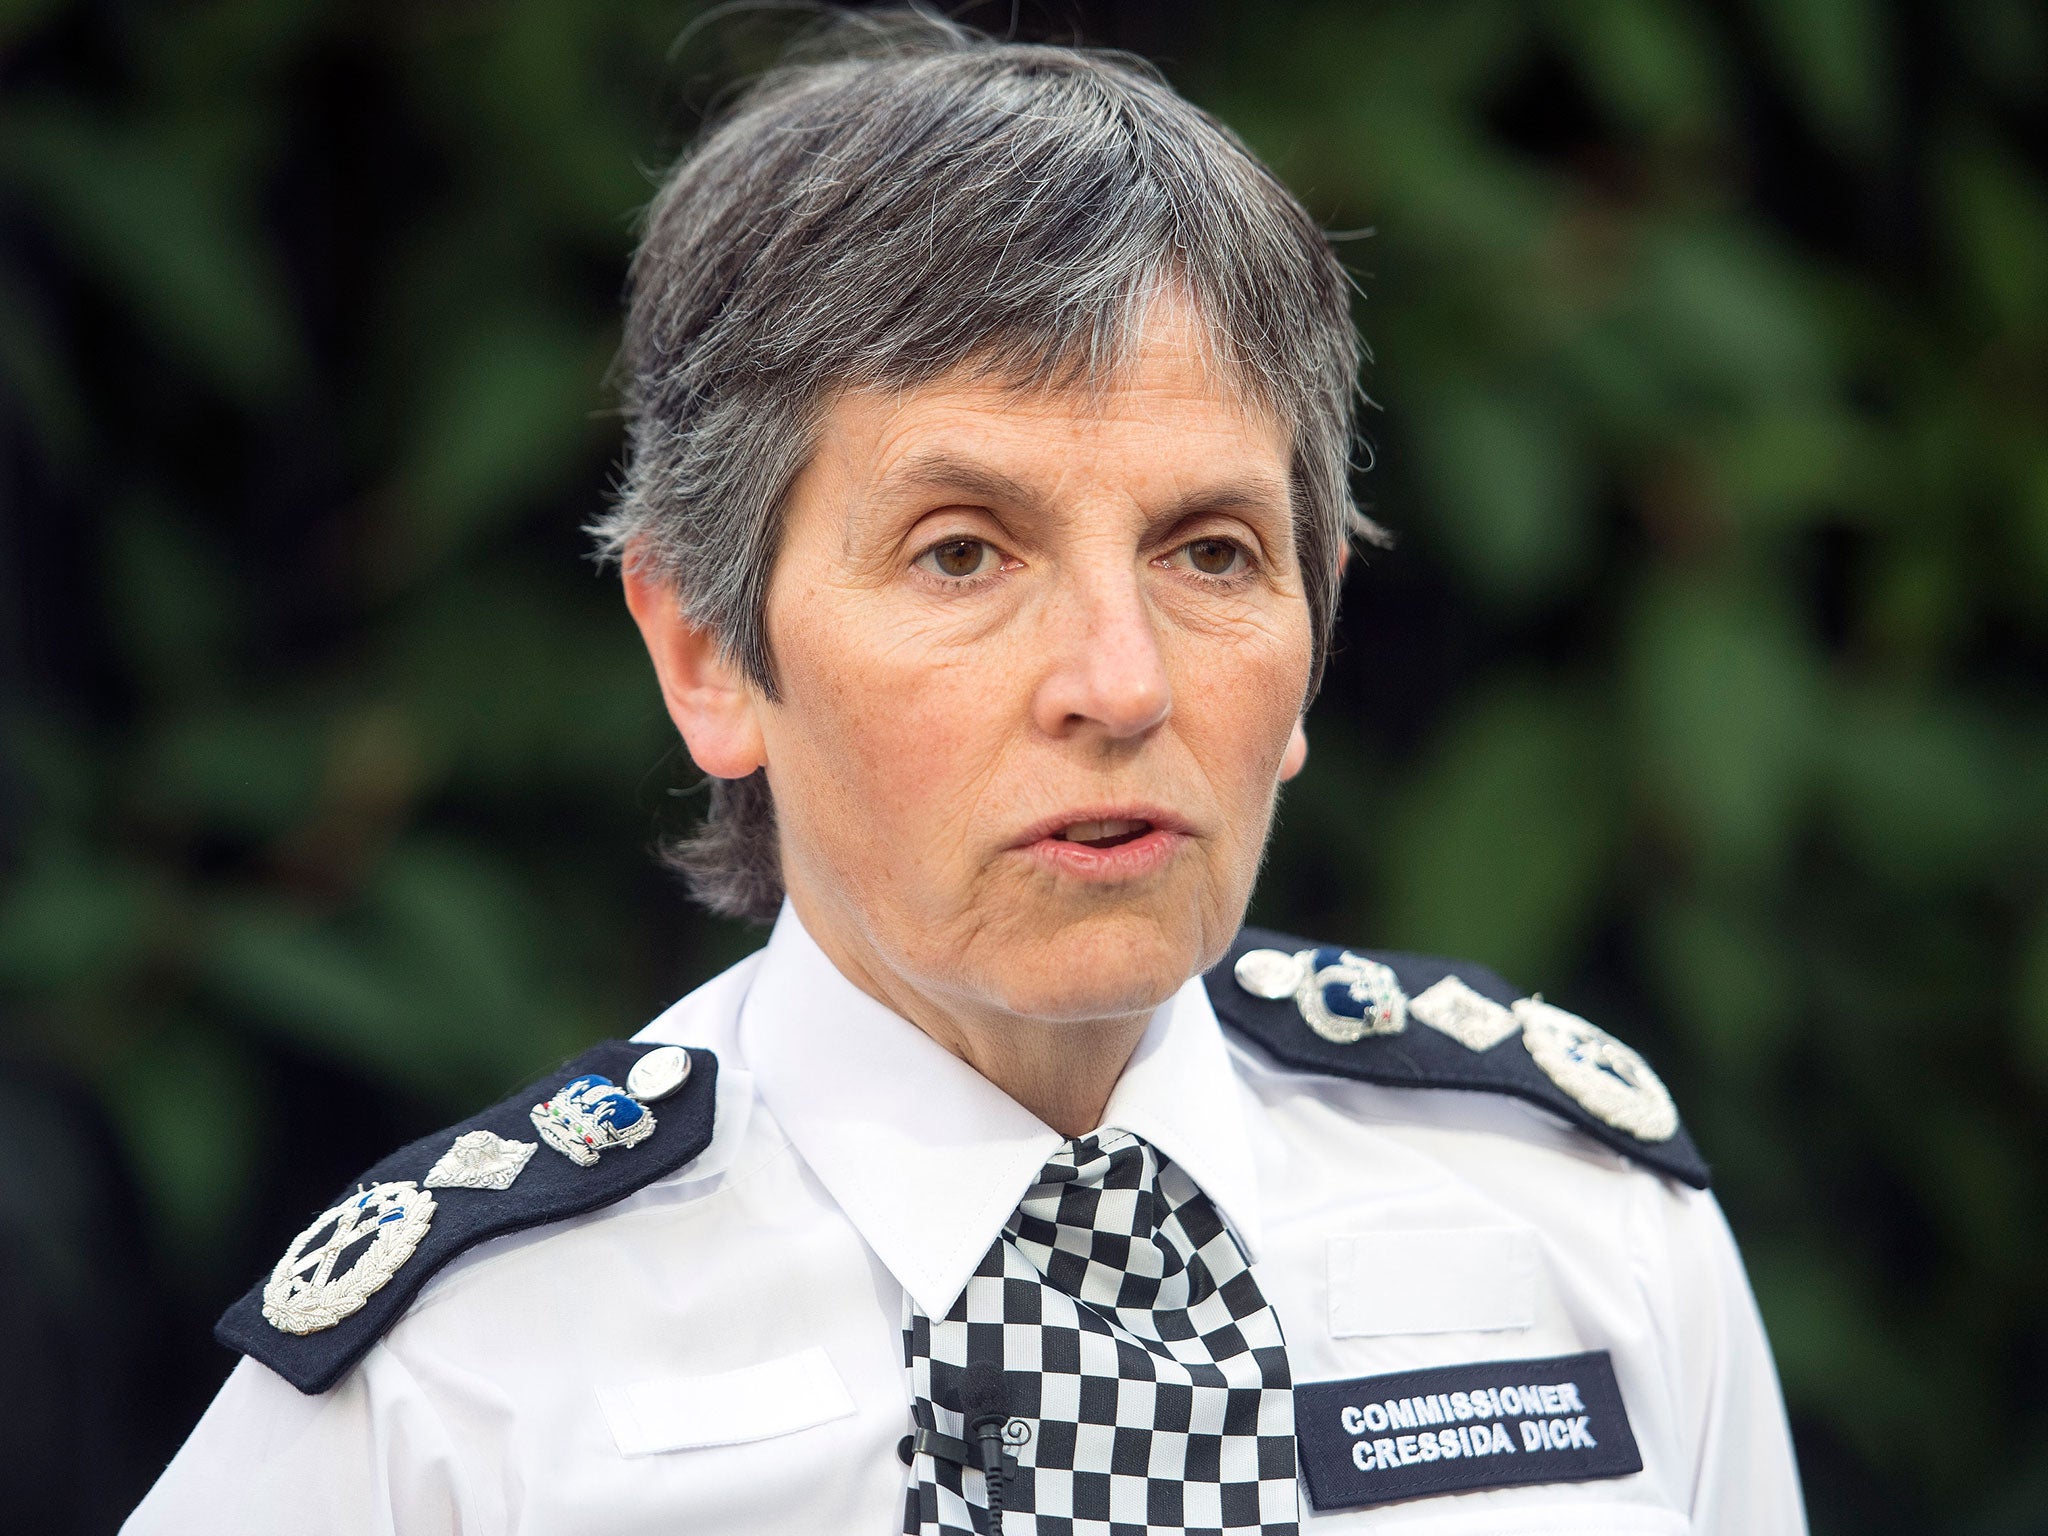 Britain’s most senior police officer became the first female and first openly gay Commissioner of the Met when she took up the role in 2017